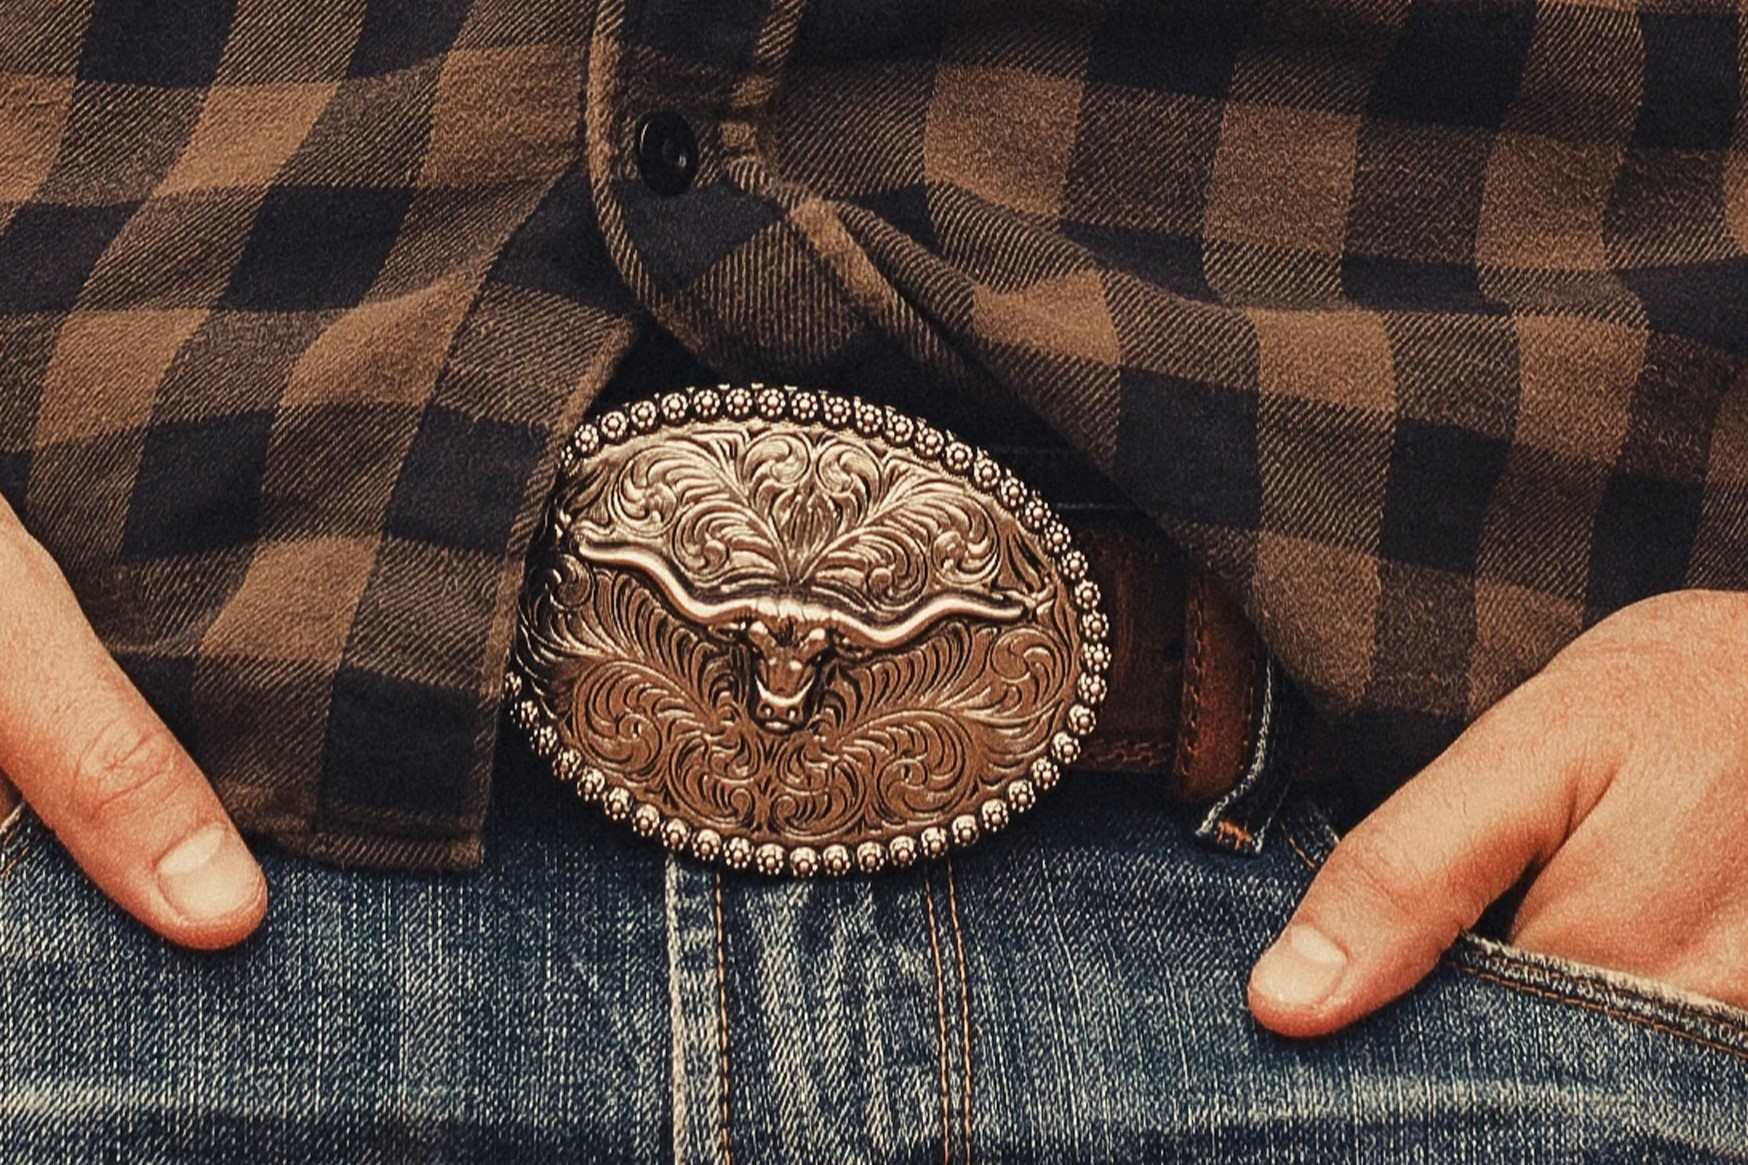 How To Put On A Belt Buckle